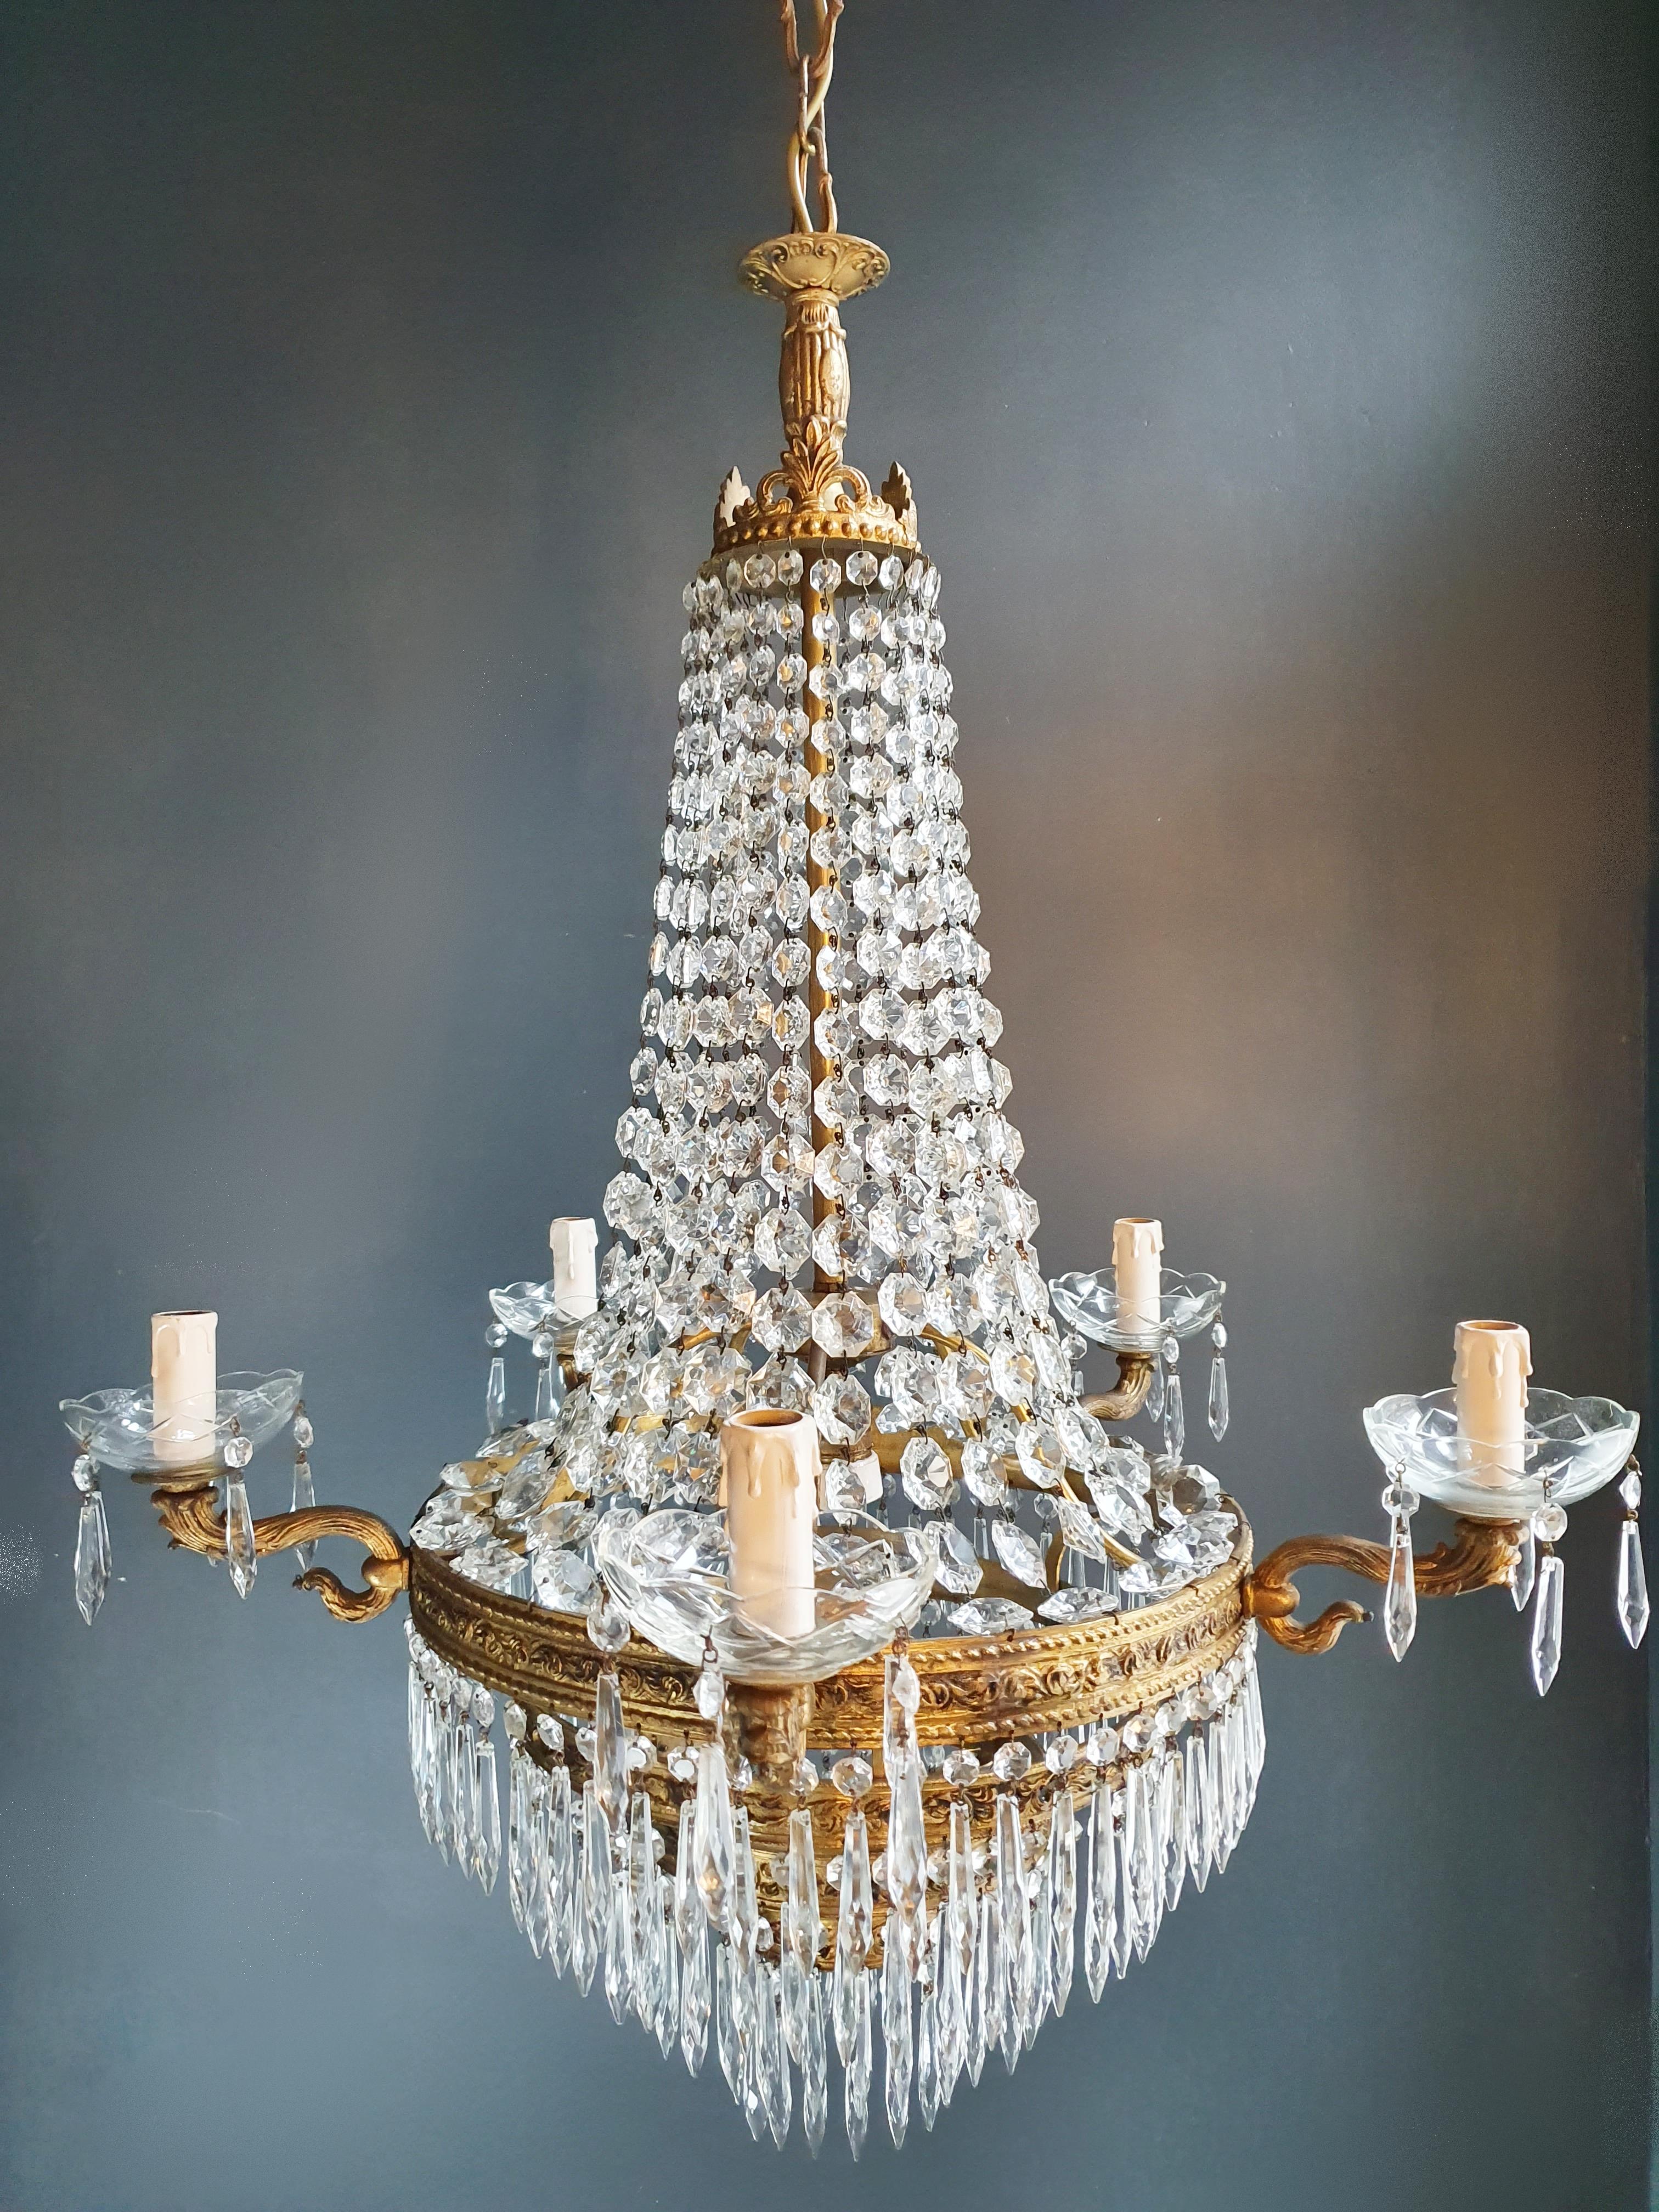 Hand-Knotted Montgolfiè Empire Sac a Pearl Chandelier Crystal Lustre Ceiling Lamp Antique For Sale